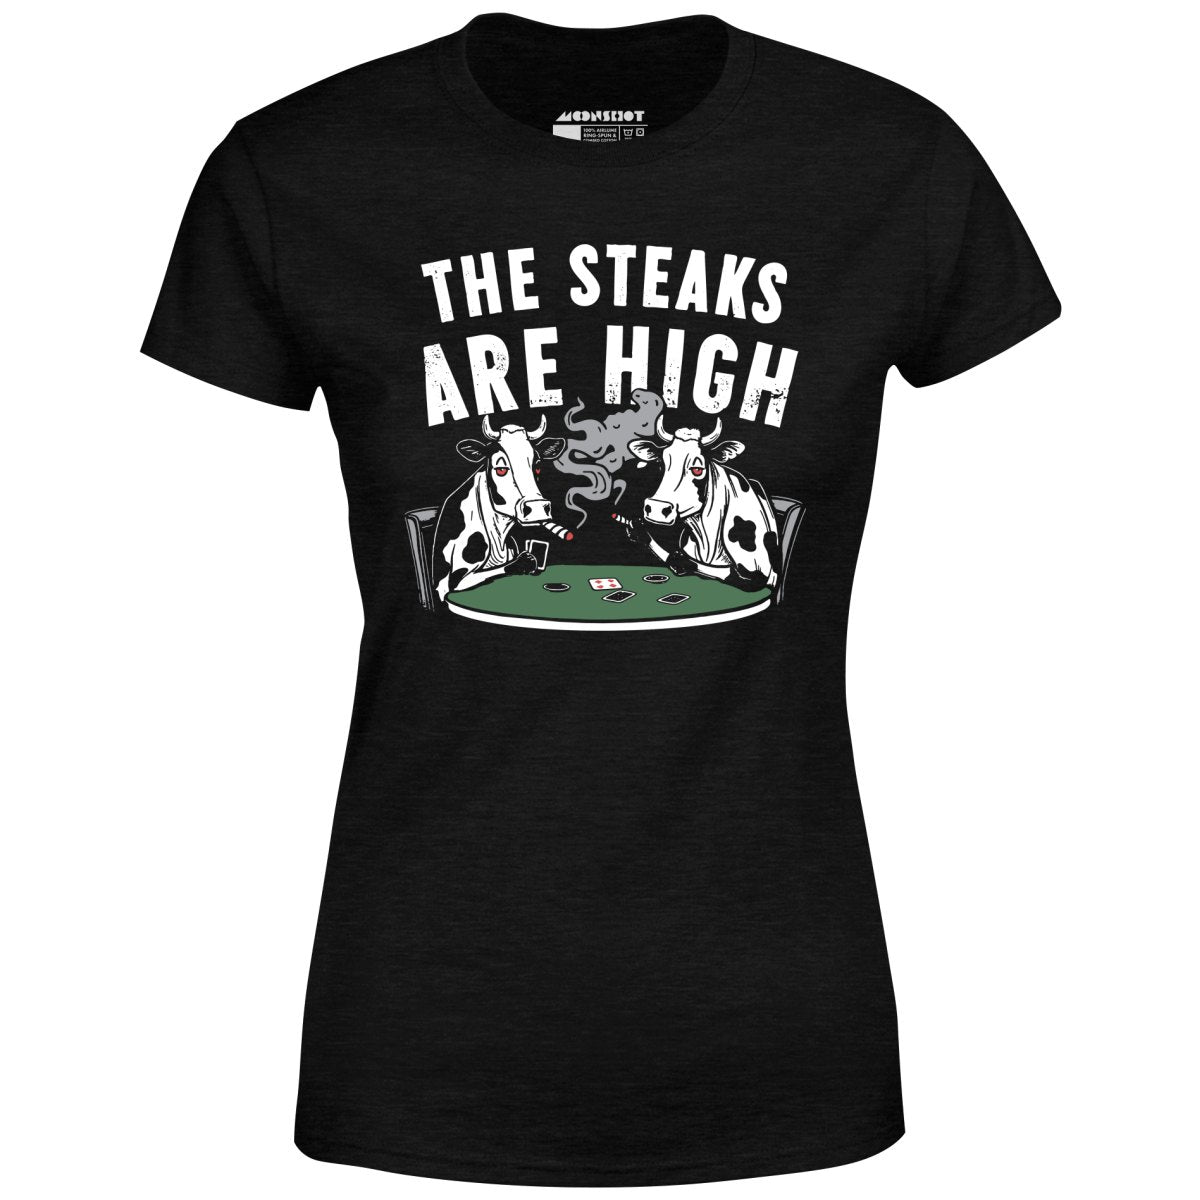 The Steaks Are High - Women's T-Shirt